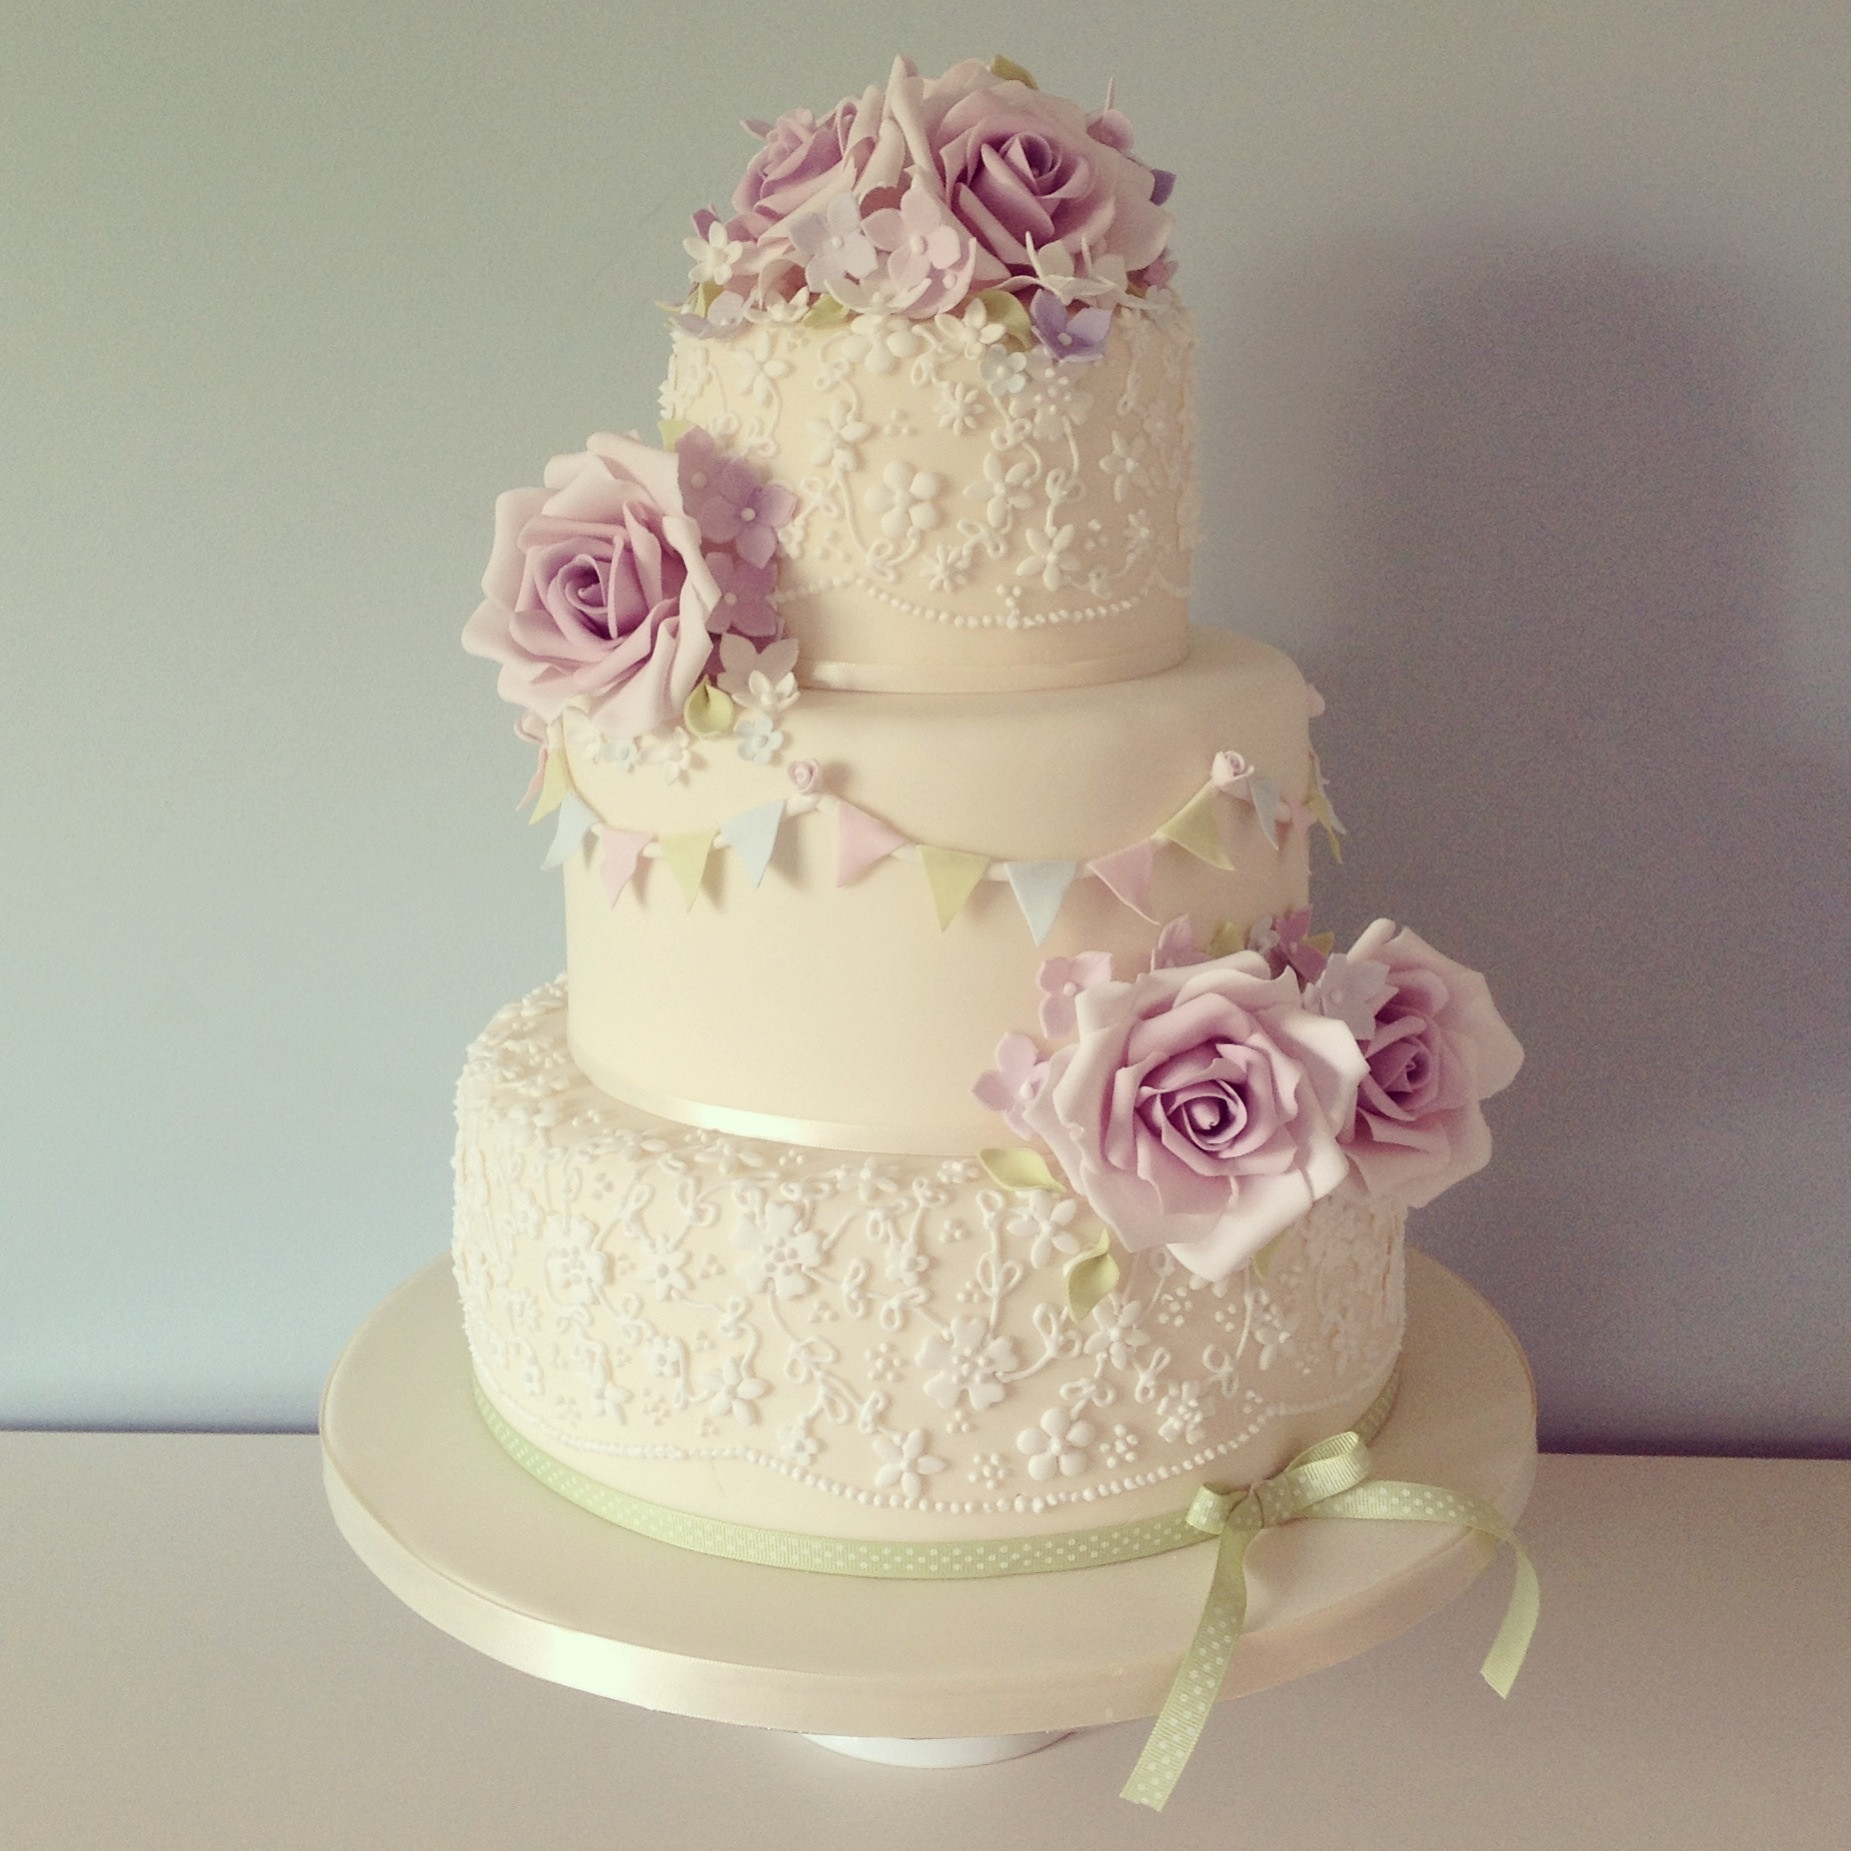 Vintage Style Wedding Cakes
 Vintage Rose And Bunting Wedding Cake CakeCentral